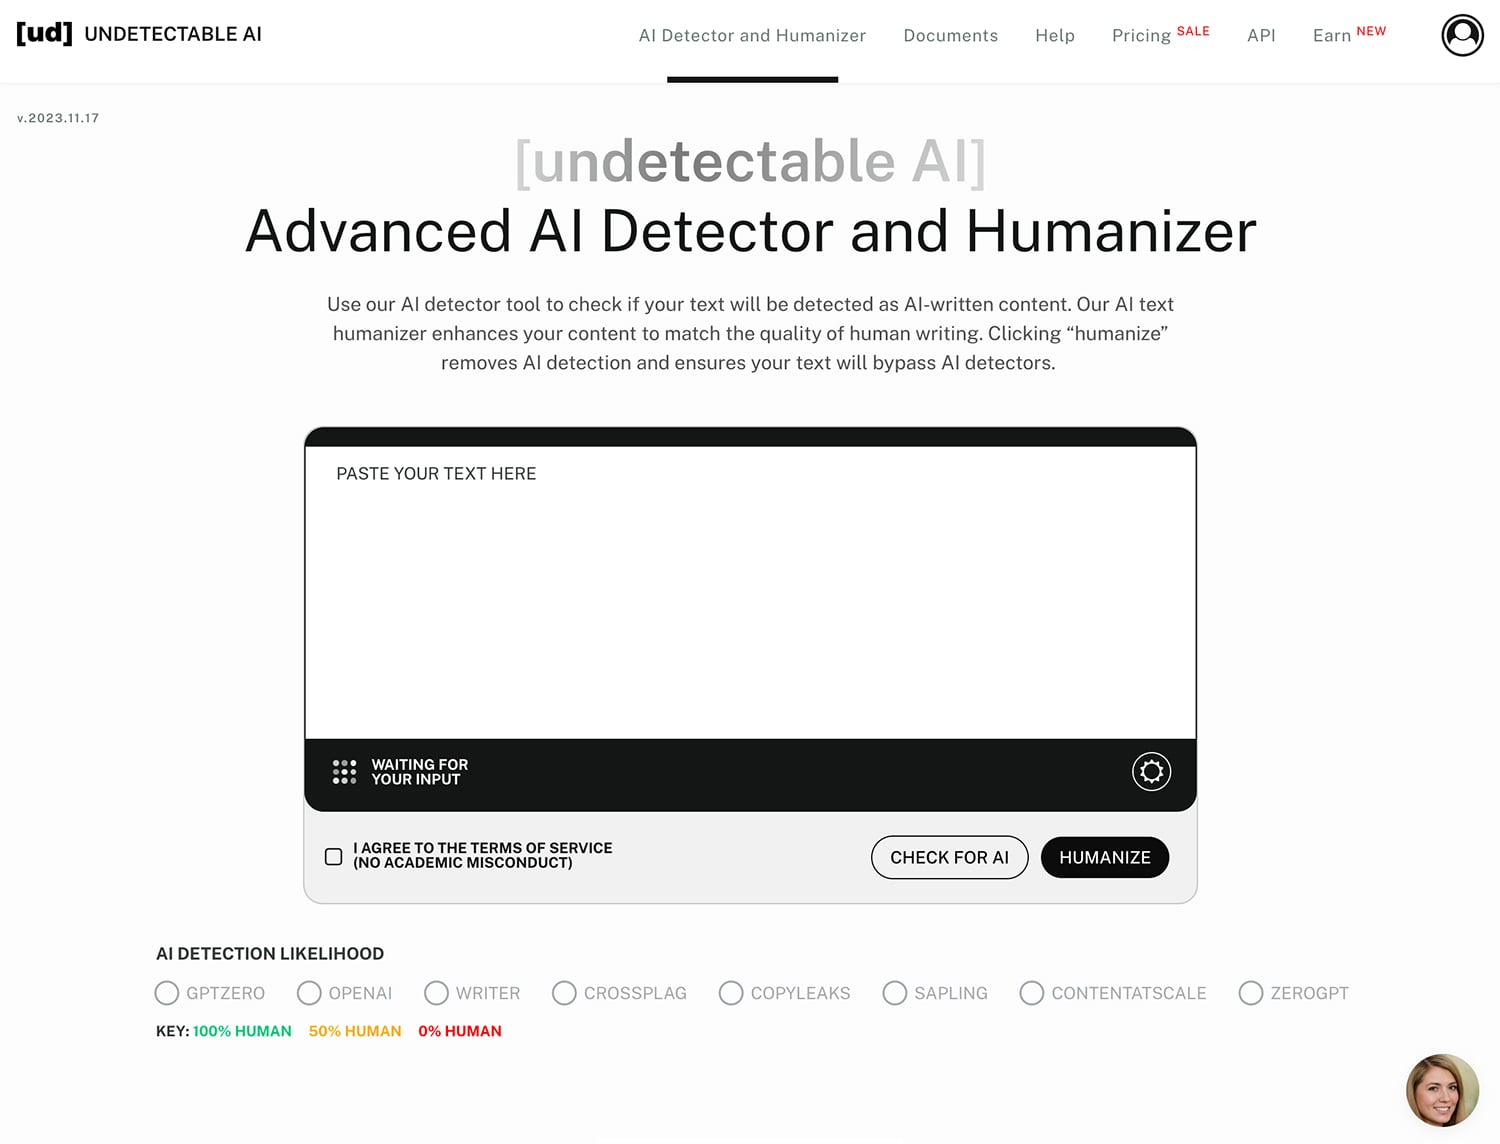 undetectable-ai-home